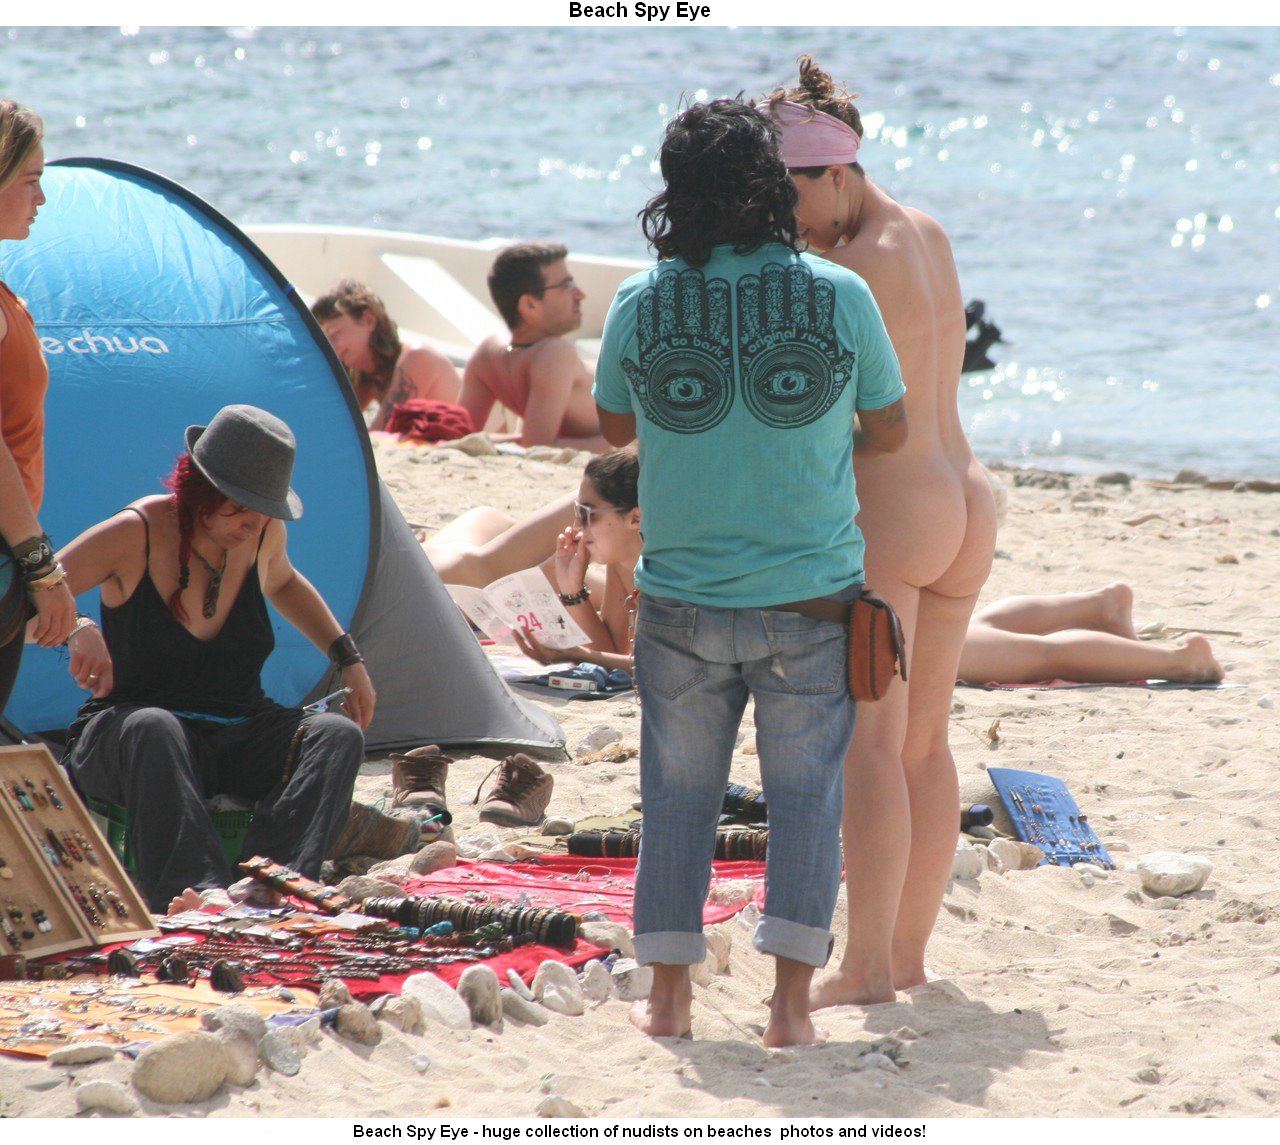 Nude Beaches Pics Nudist beach photos - adorable blonds and brunet.. Picture 2